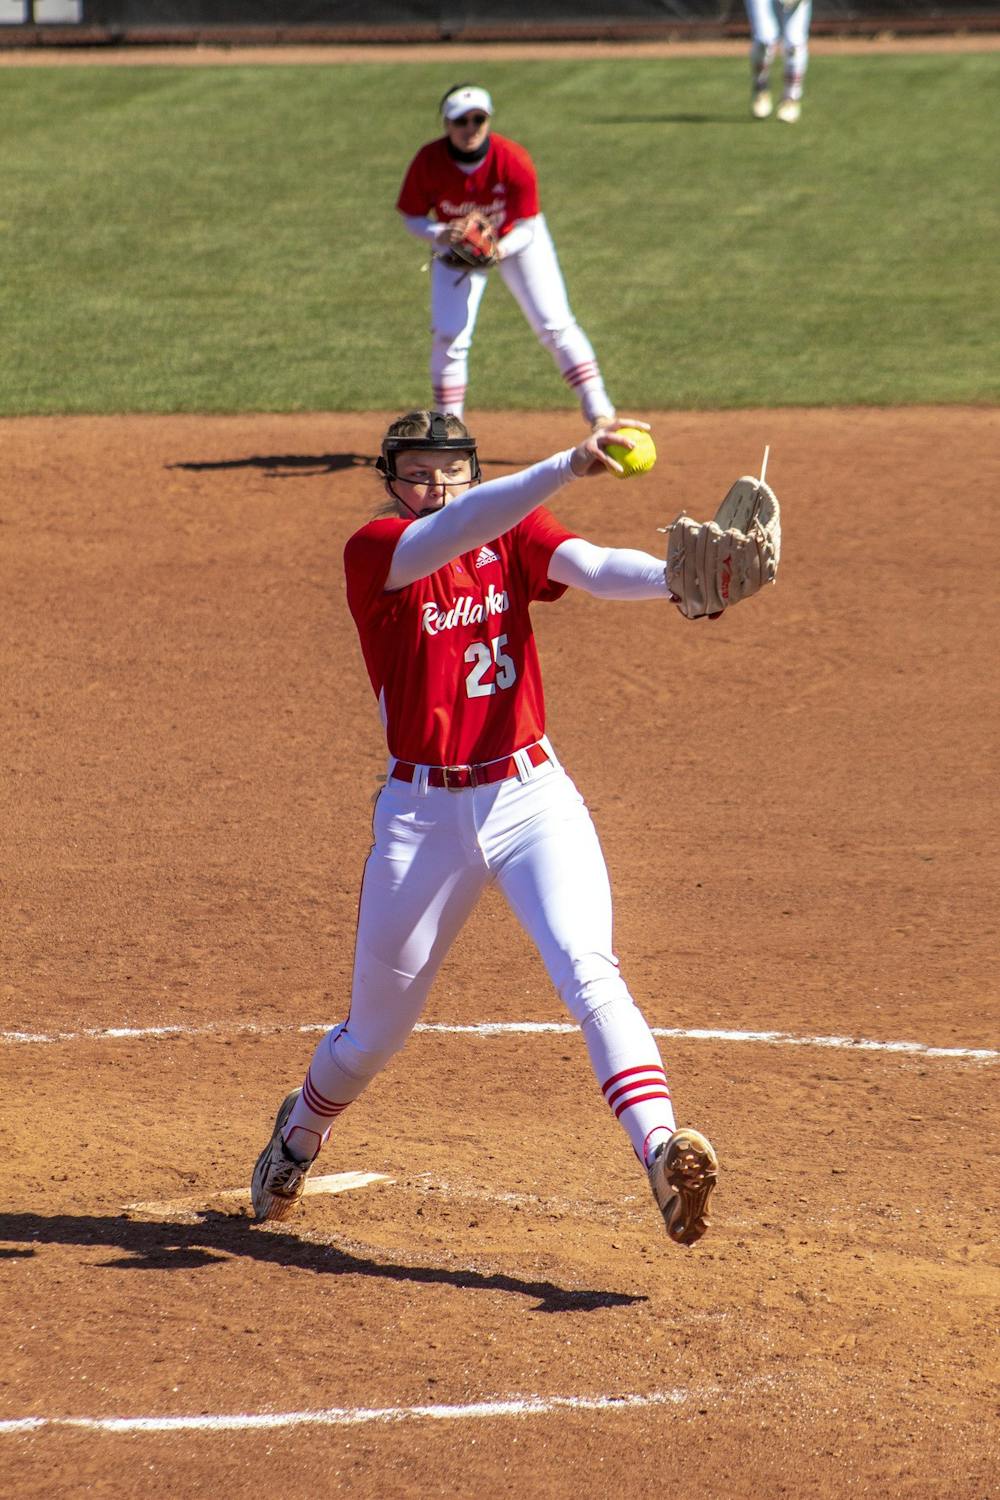 Junior pitcher Taylor Turner winds up for a pitch during a game last spring